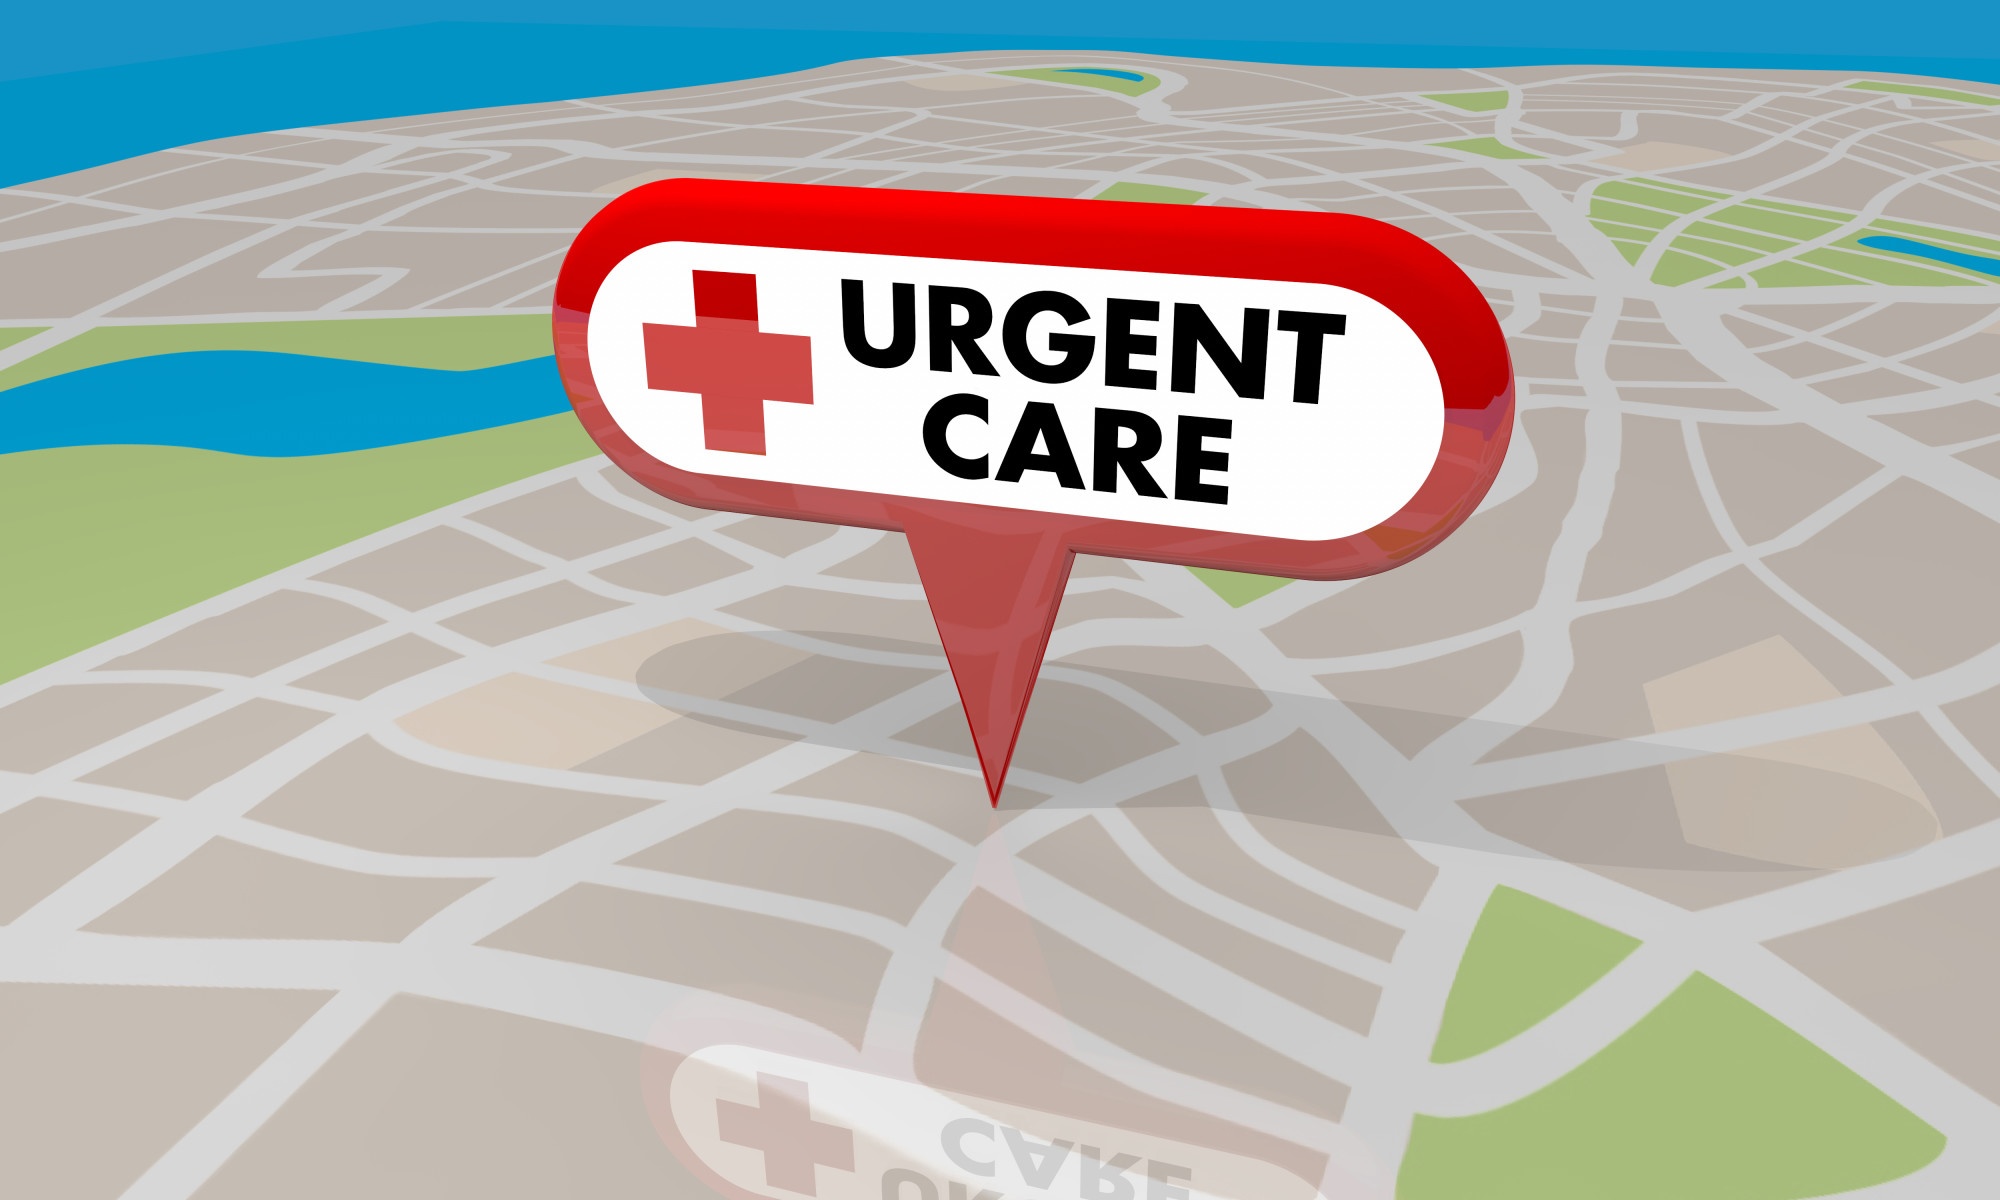 How Much Does an Urgent Care Visit Cost? The Prices to Expect